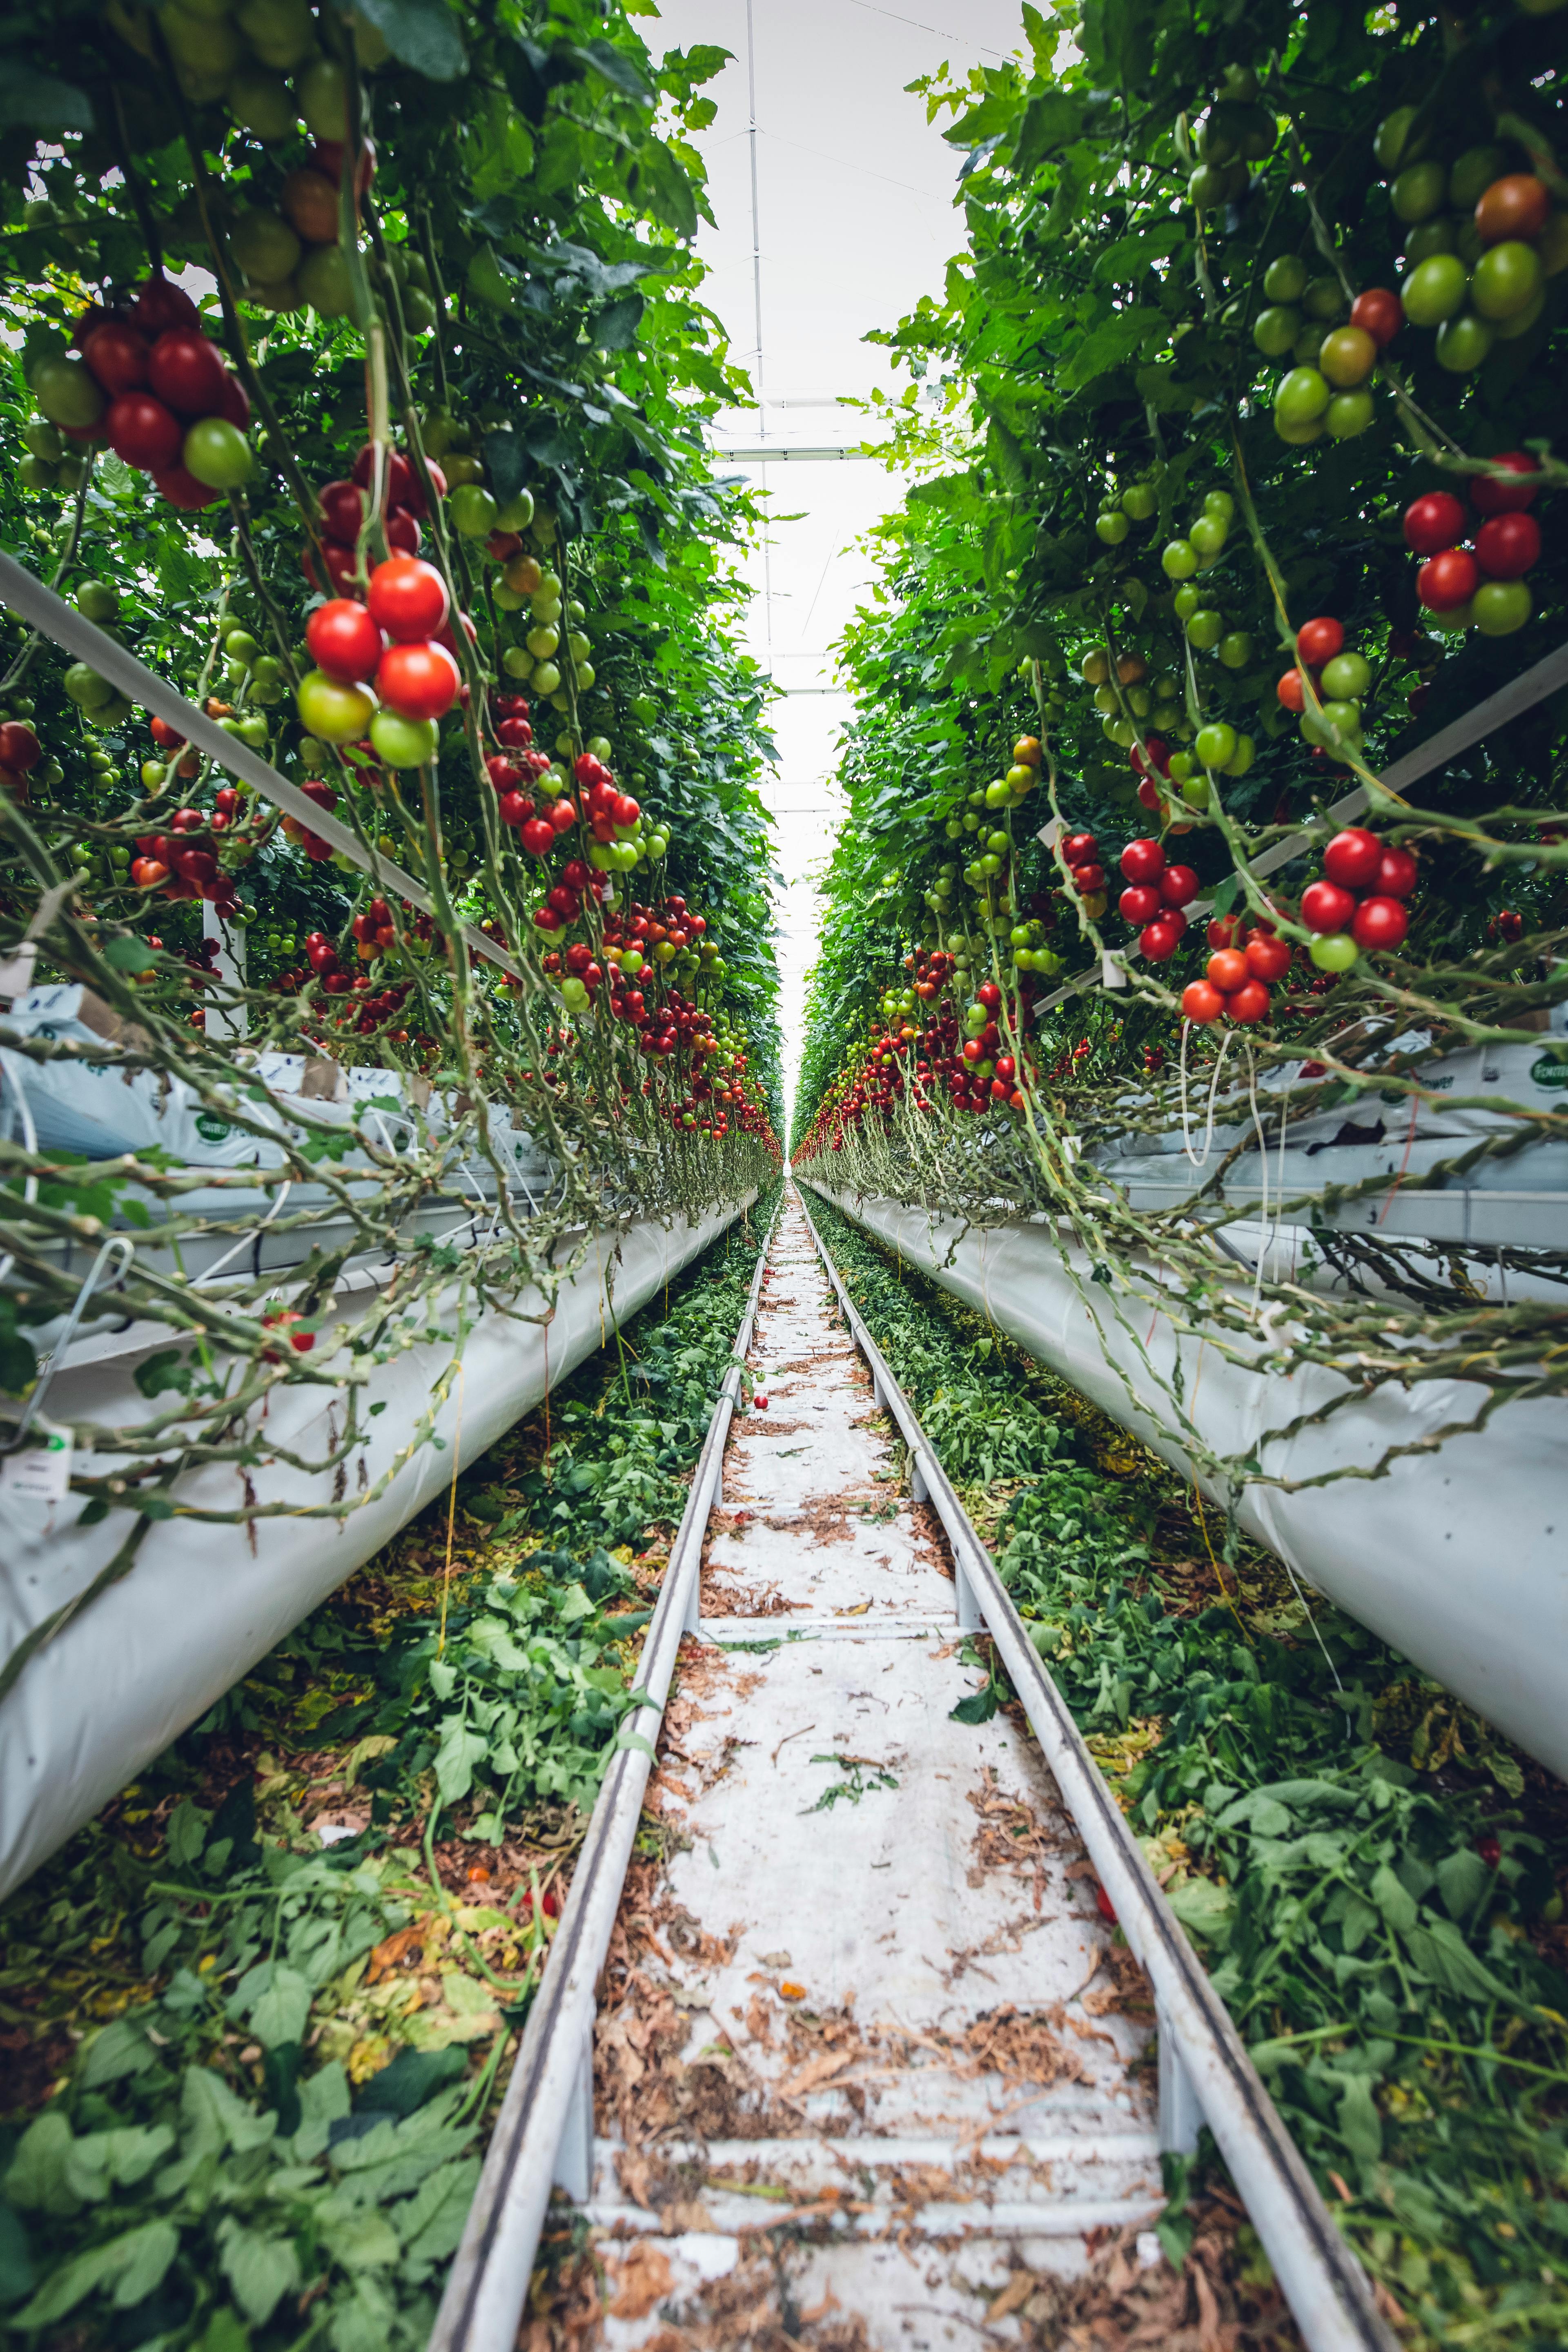 Why Are Greenhouses Bad?